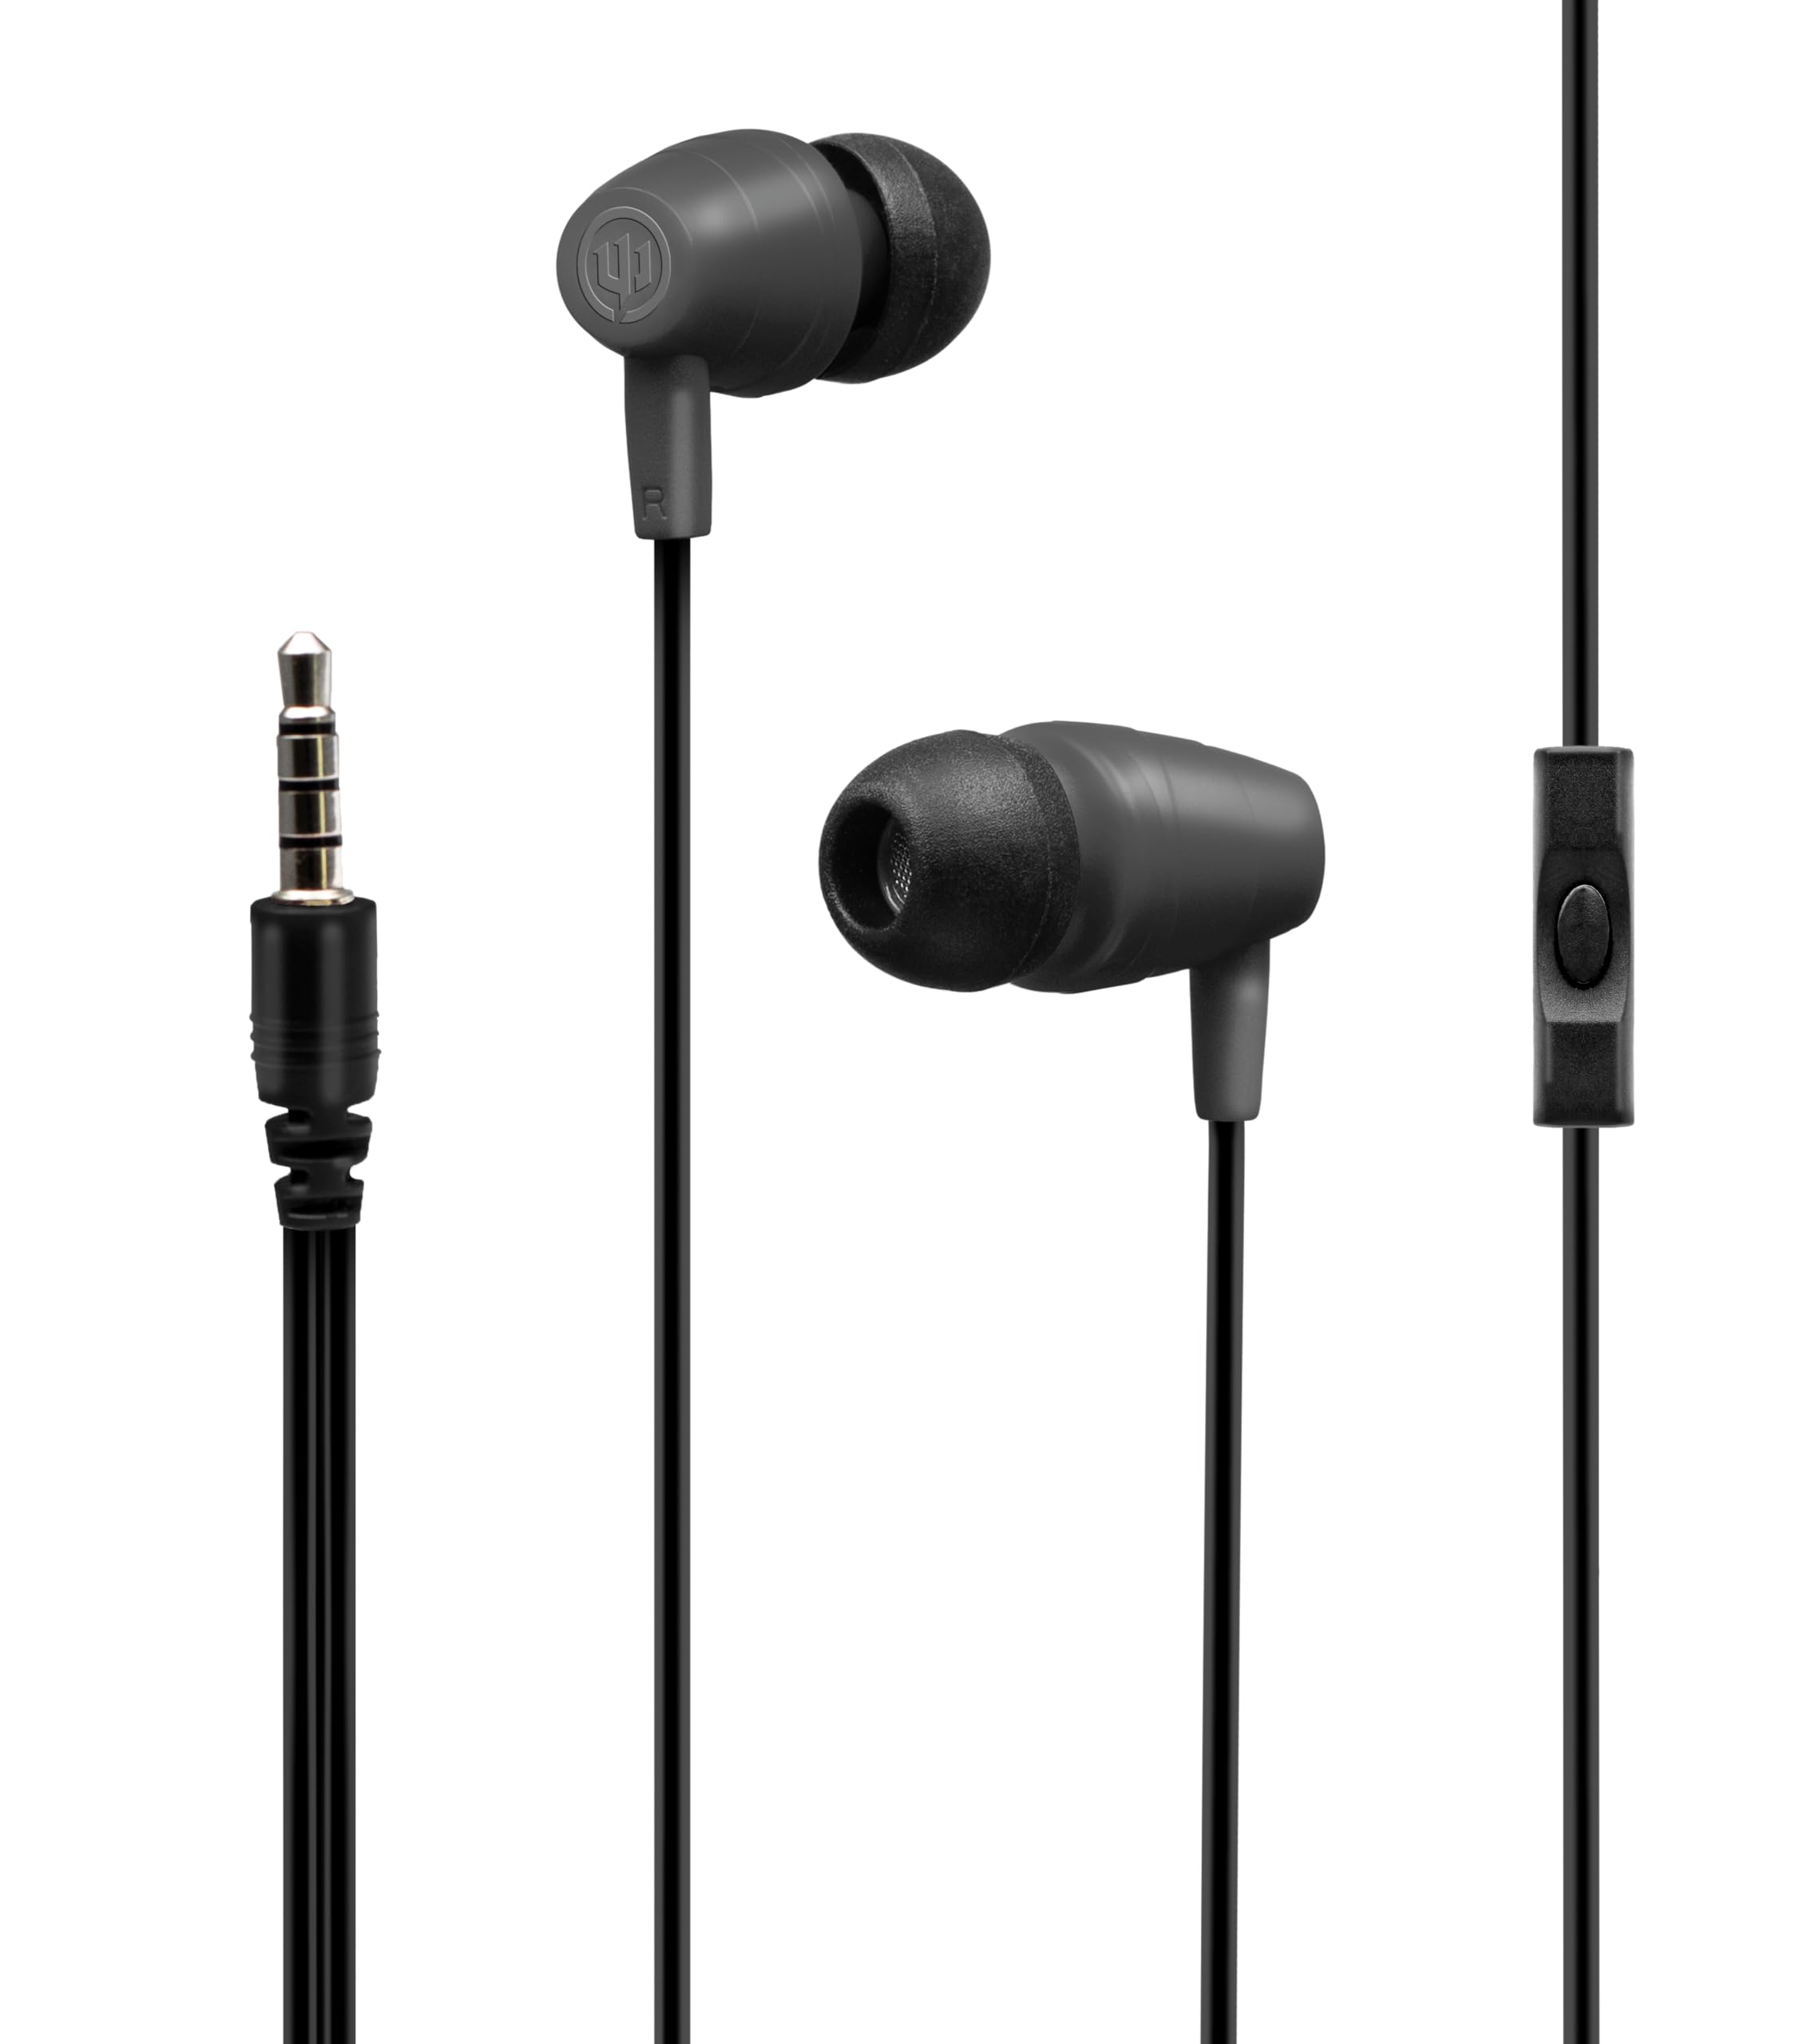 Wicked Audio WI550 Earbud Clave Wired Earbud Angled Design for Comfort- Black